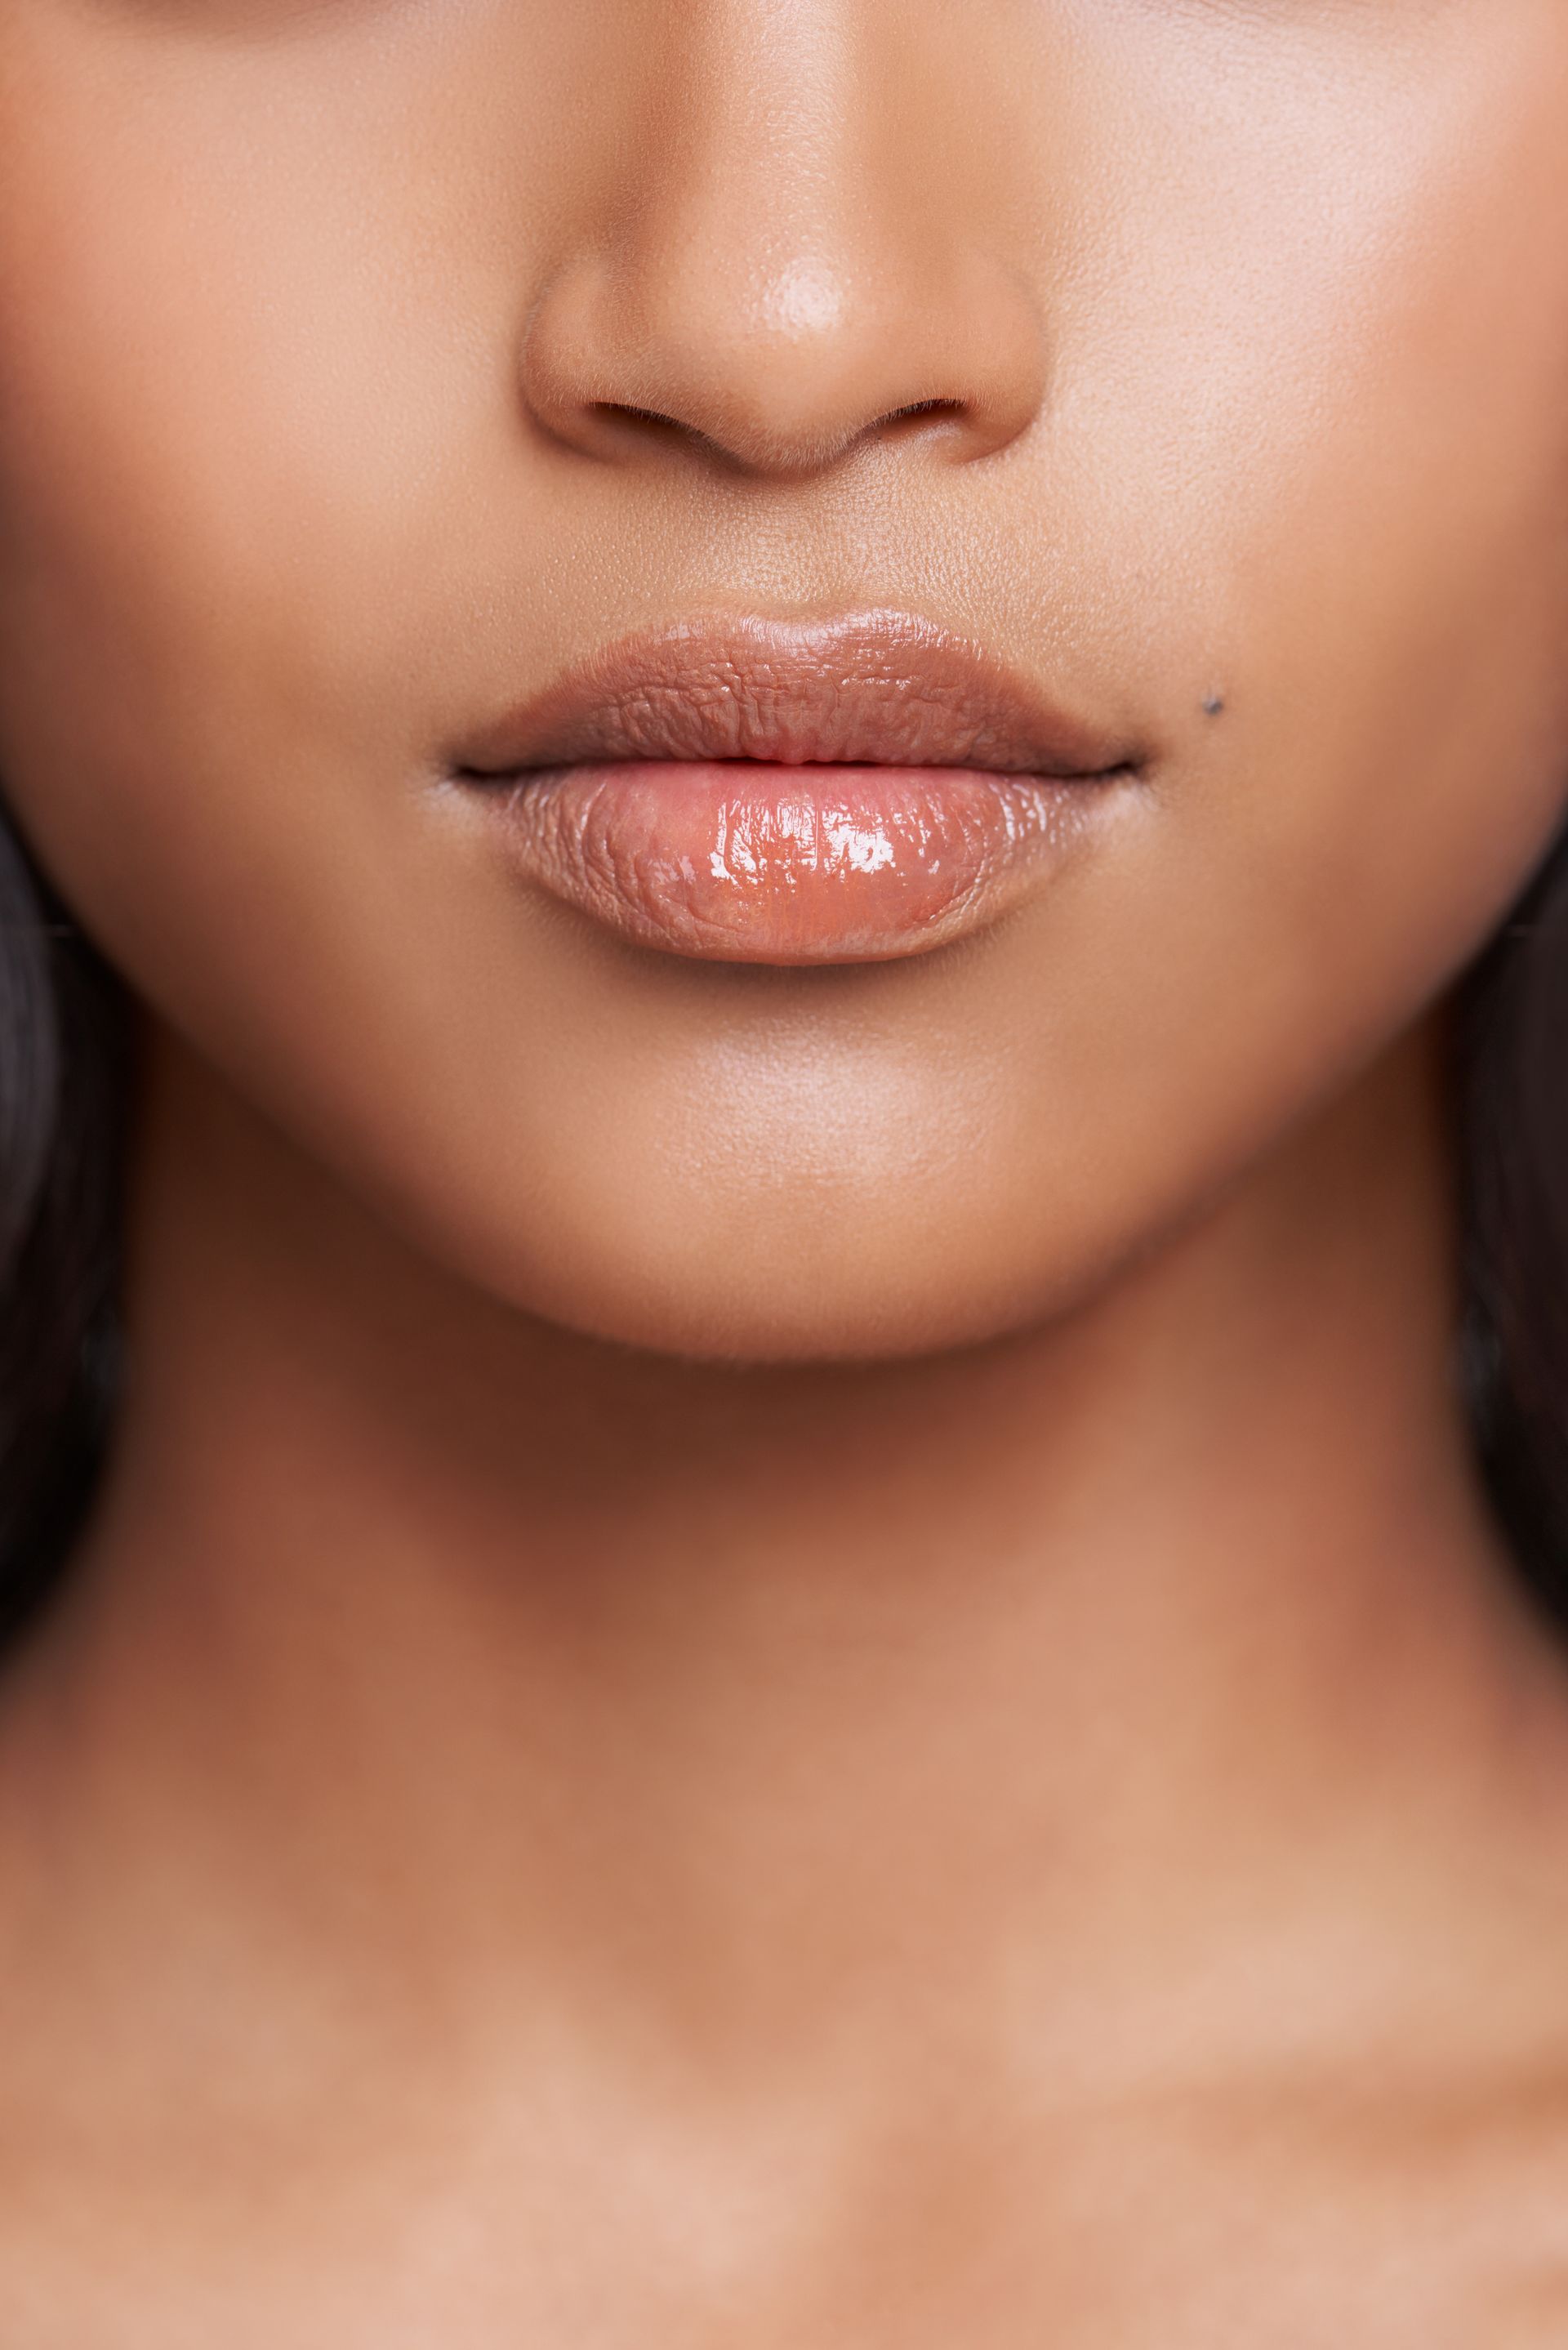 a close up of a woman 's lips with gloss on them .